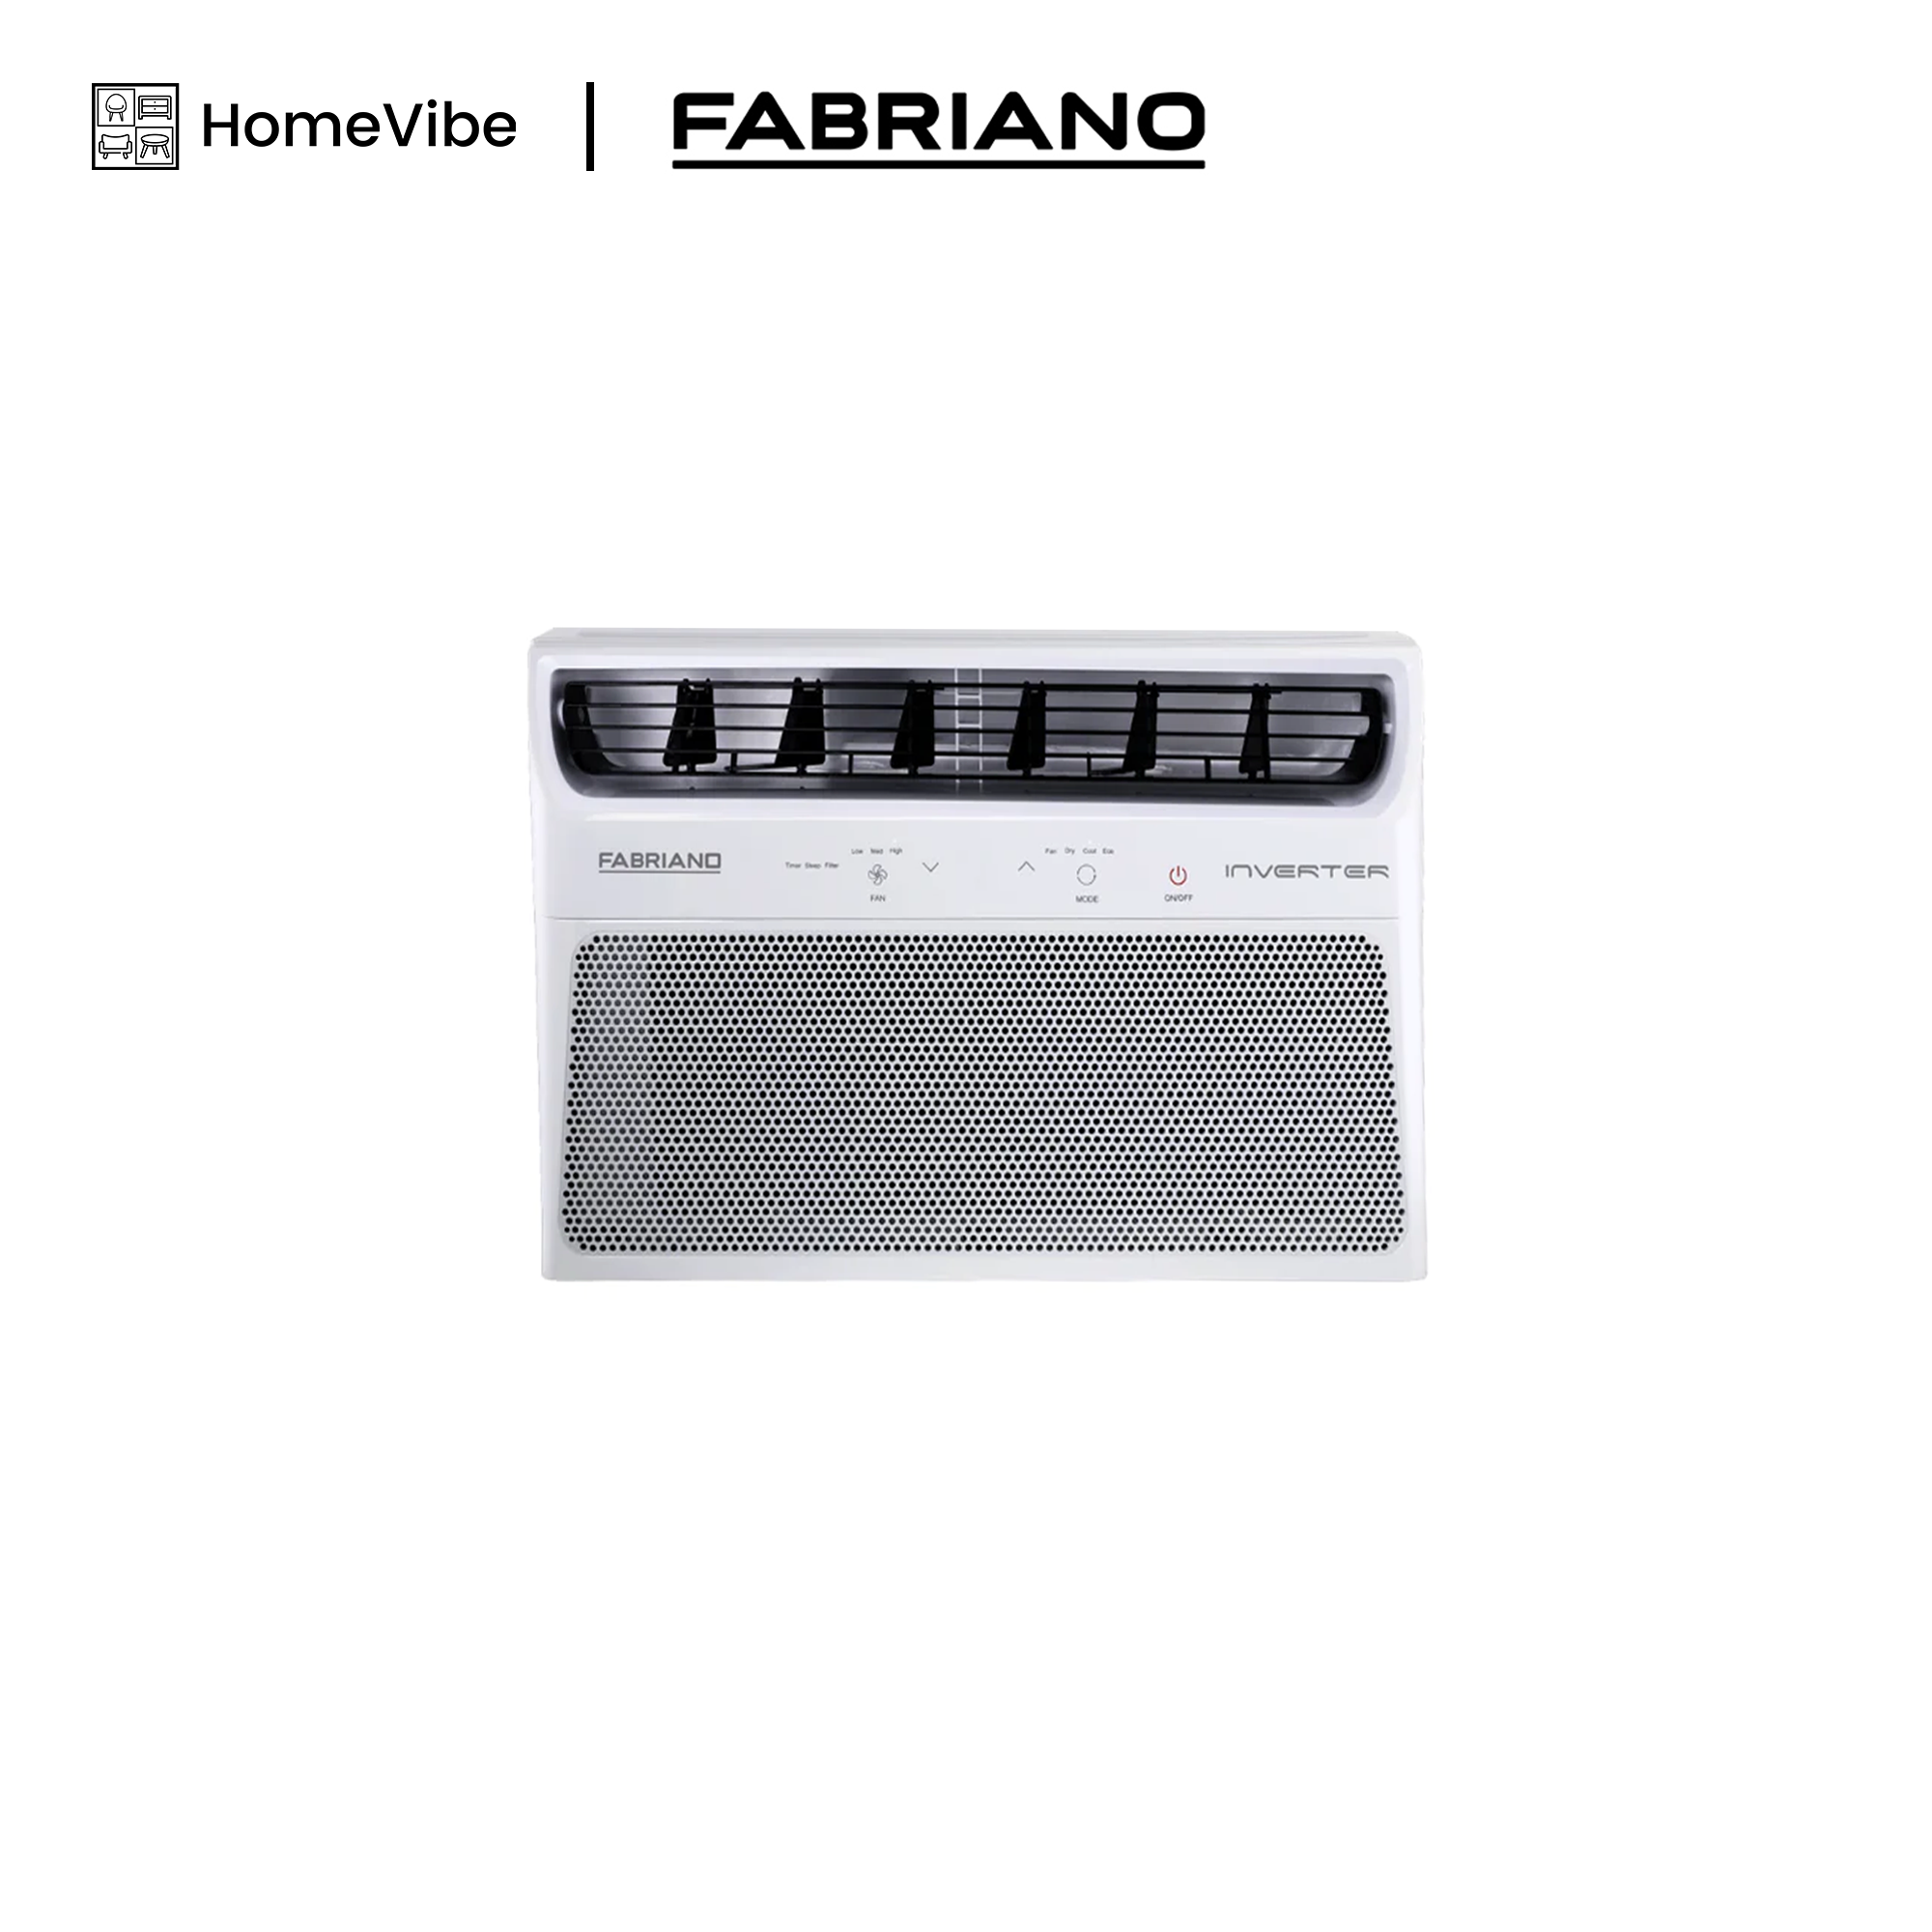 Fabriano 32 1hp Digital Control INVERTER Compact Window Type Air Conditioner FWE09HWIC